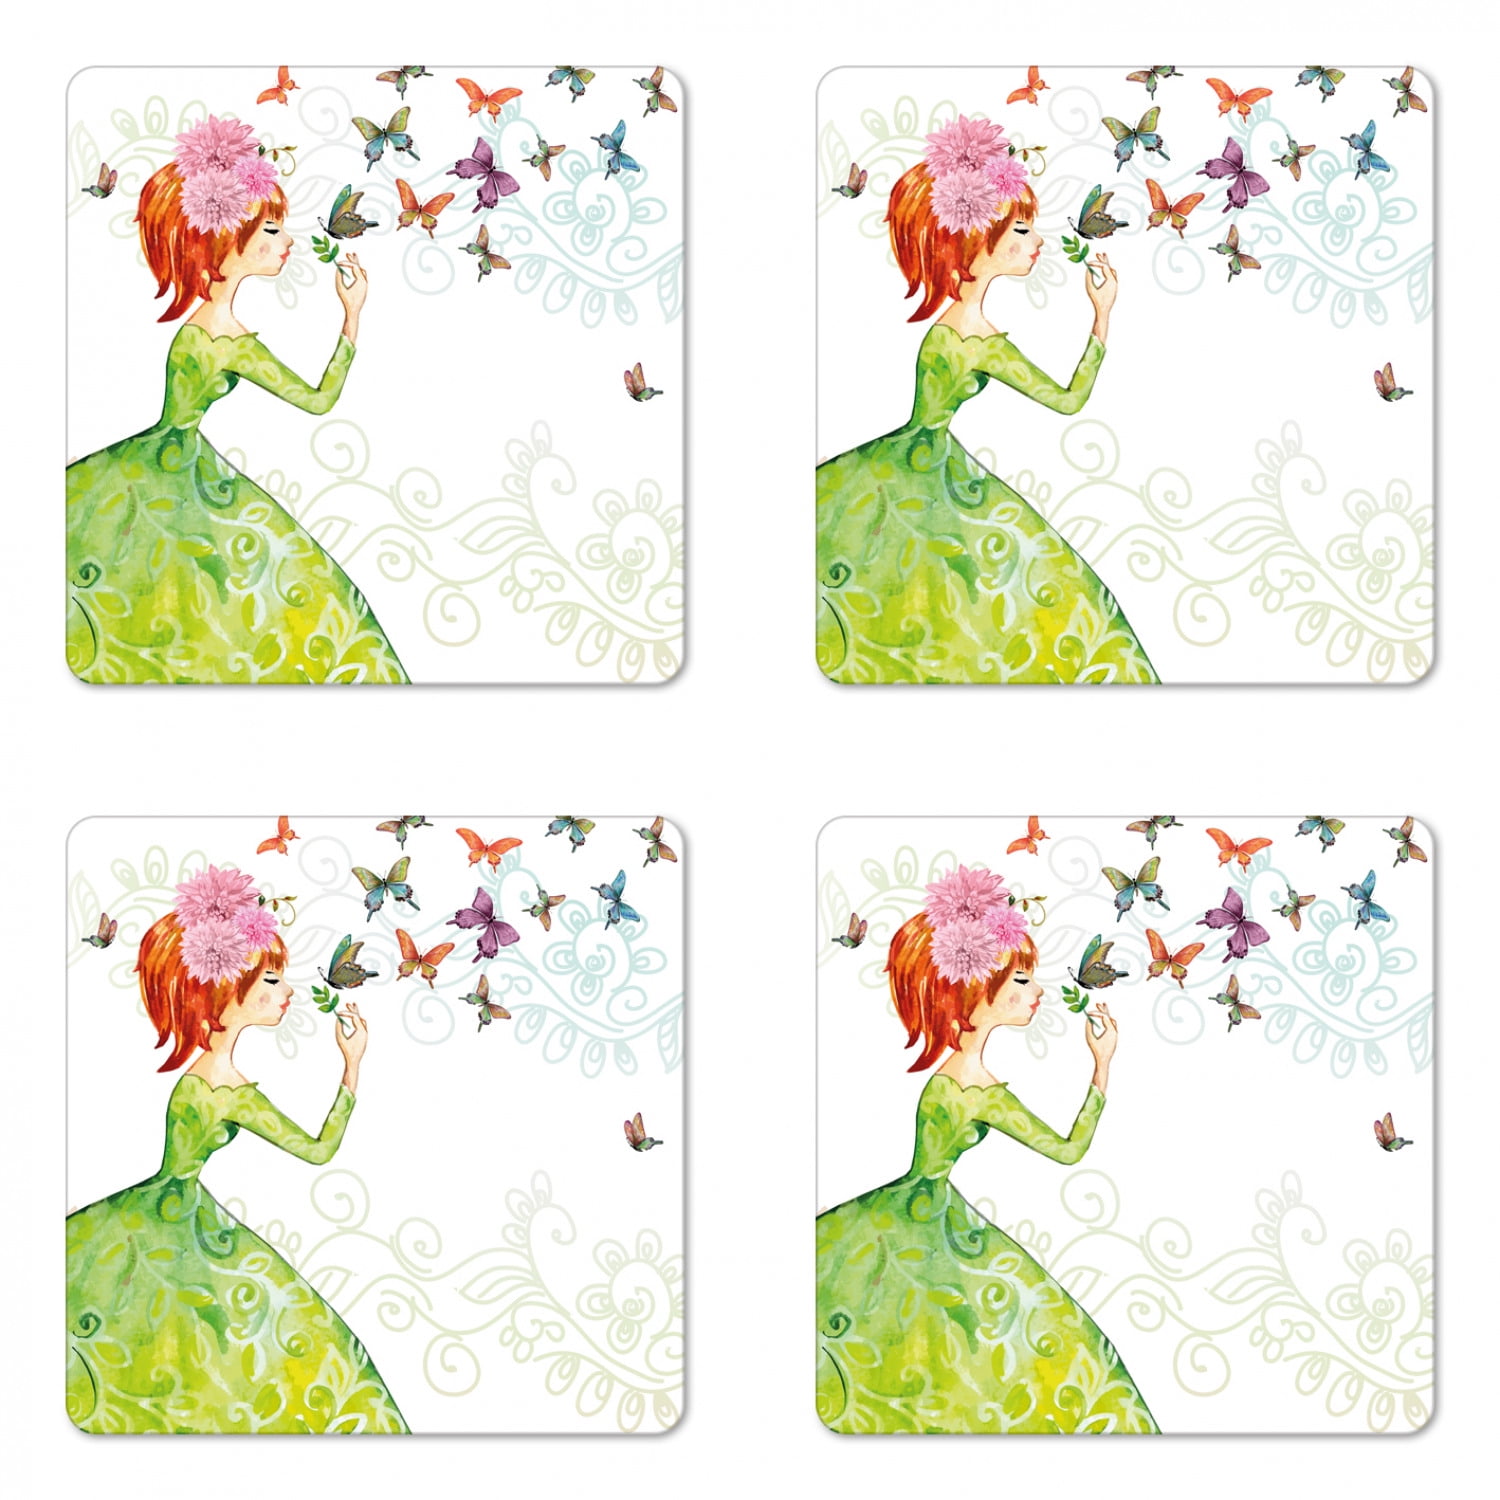 Download Butterfly Coaster Set Of 4 Floral Lady In Green Dress Leaf Ornaments Flower Pastel Winged Bug Square Hardboard Gloss Coasters Standard Size Pink Orange Green By Ambesonne Walmart Com Walmart Com